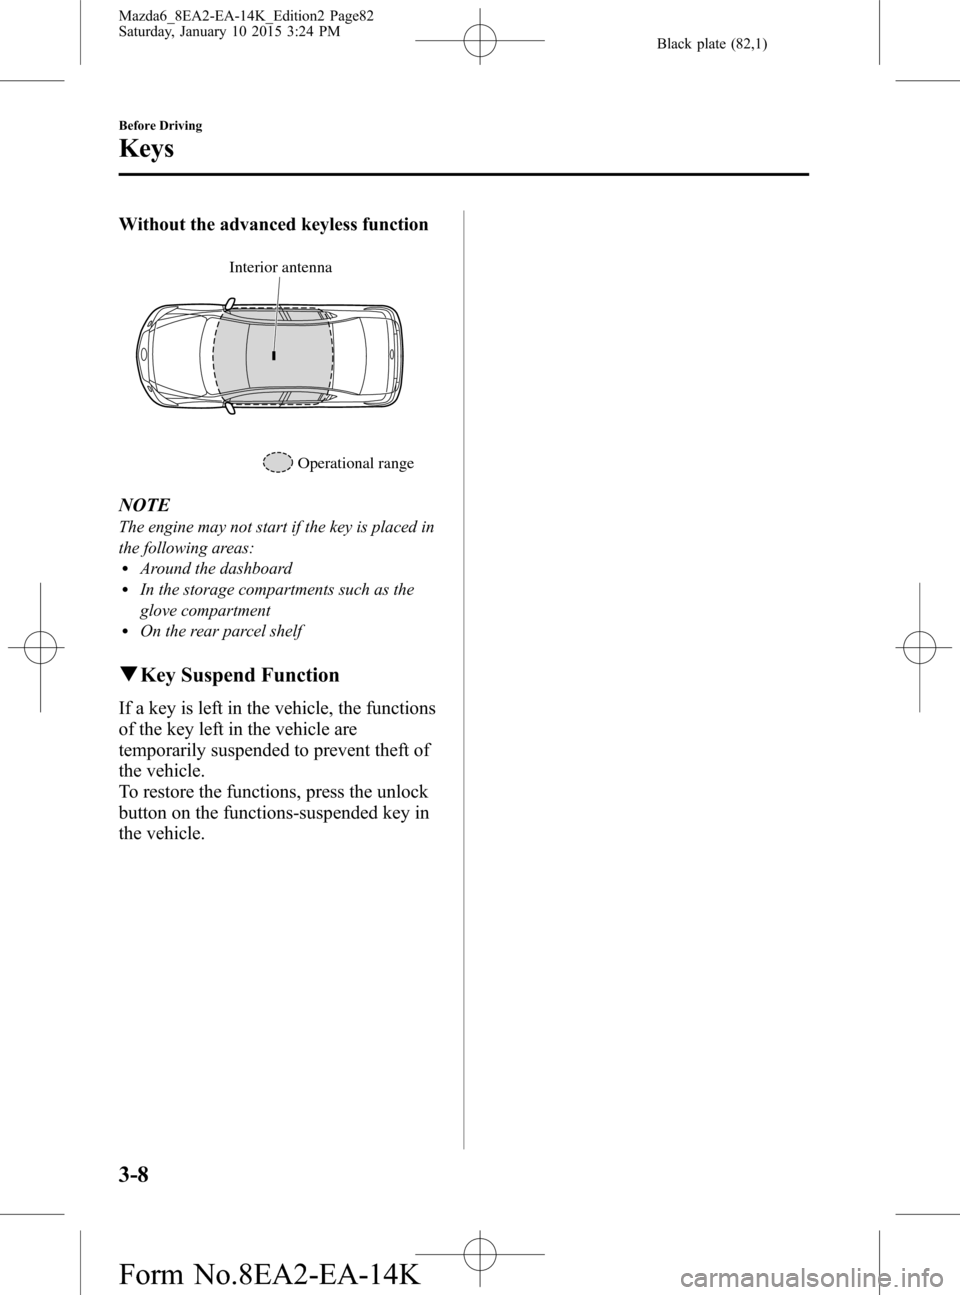 MAZDA MODEL 6 2016  Owners Manual (in English) Black plate (82,1)
Without the advanced keyless function
Interior antenna
Operational range
NOTE
The engine may not start if the key is placed in
the following areas:
lAround the dashboardlIn the stor